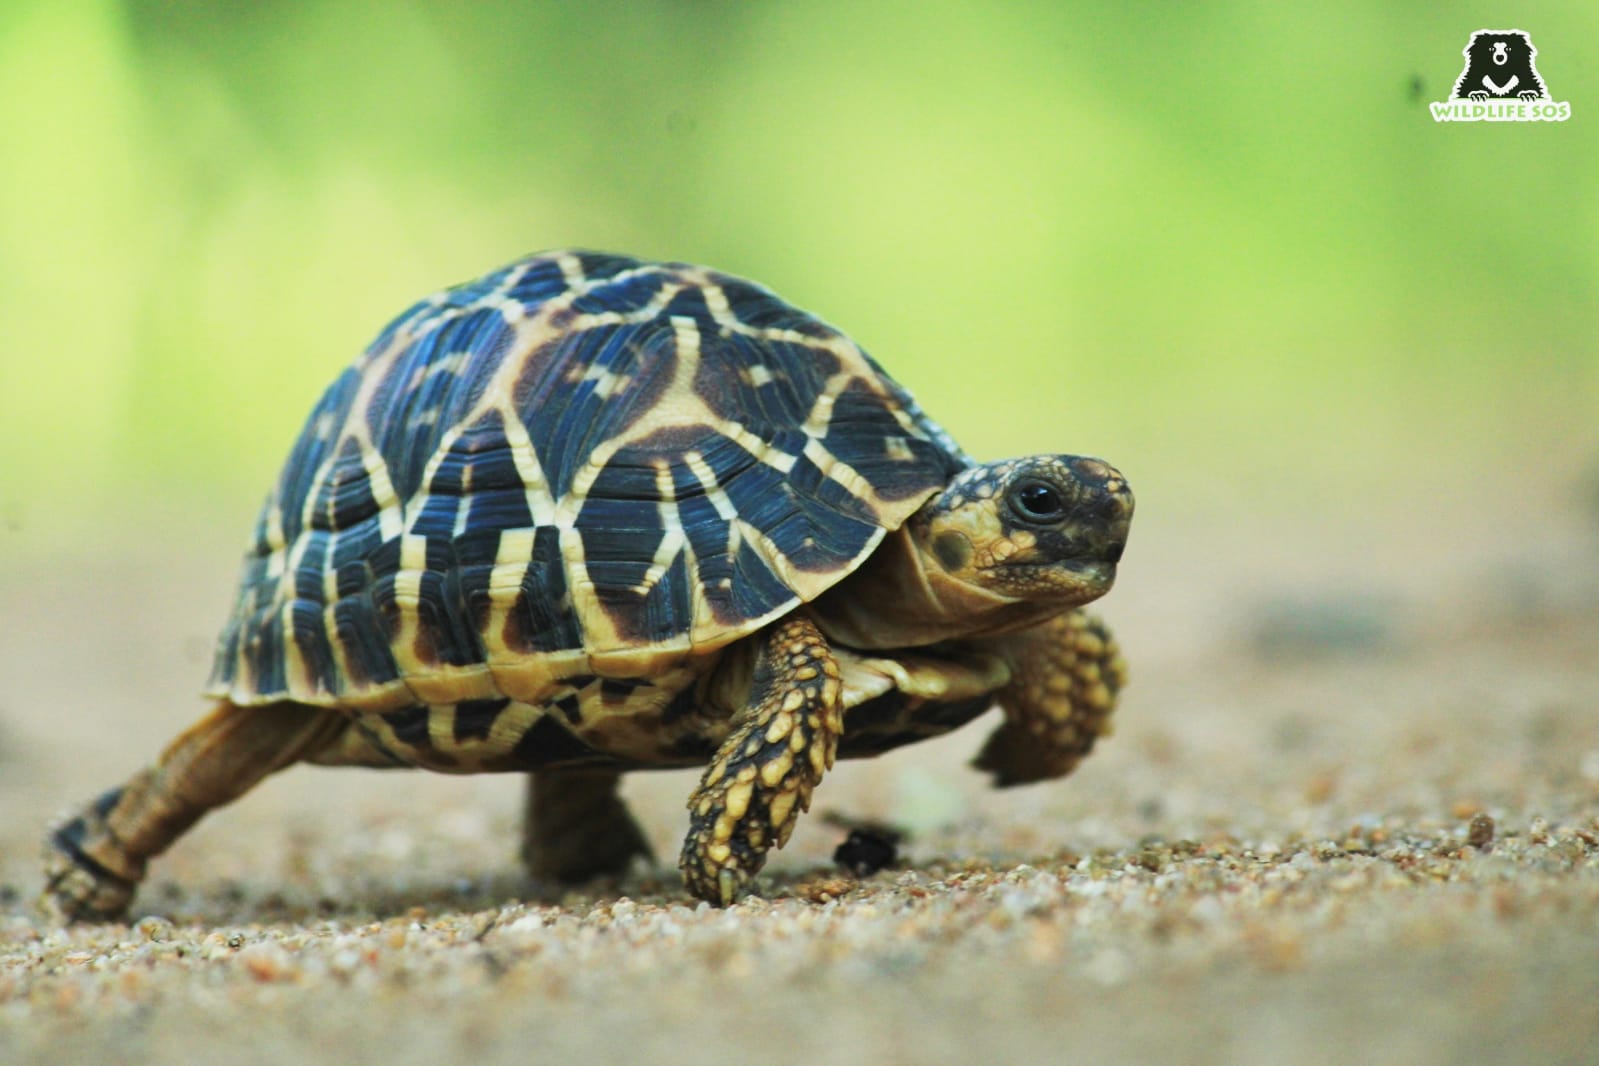 Indian Star Tortoise is protected by CITES due to exploitation and illegal trade